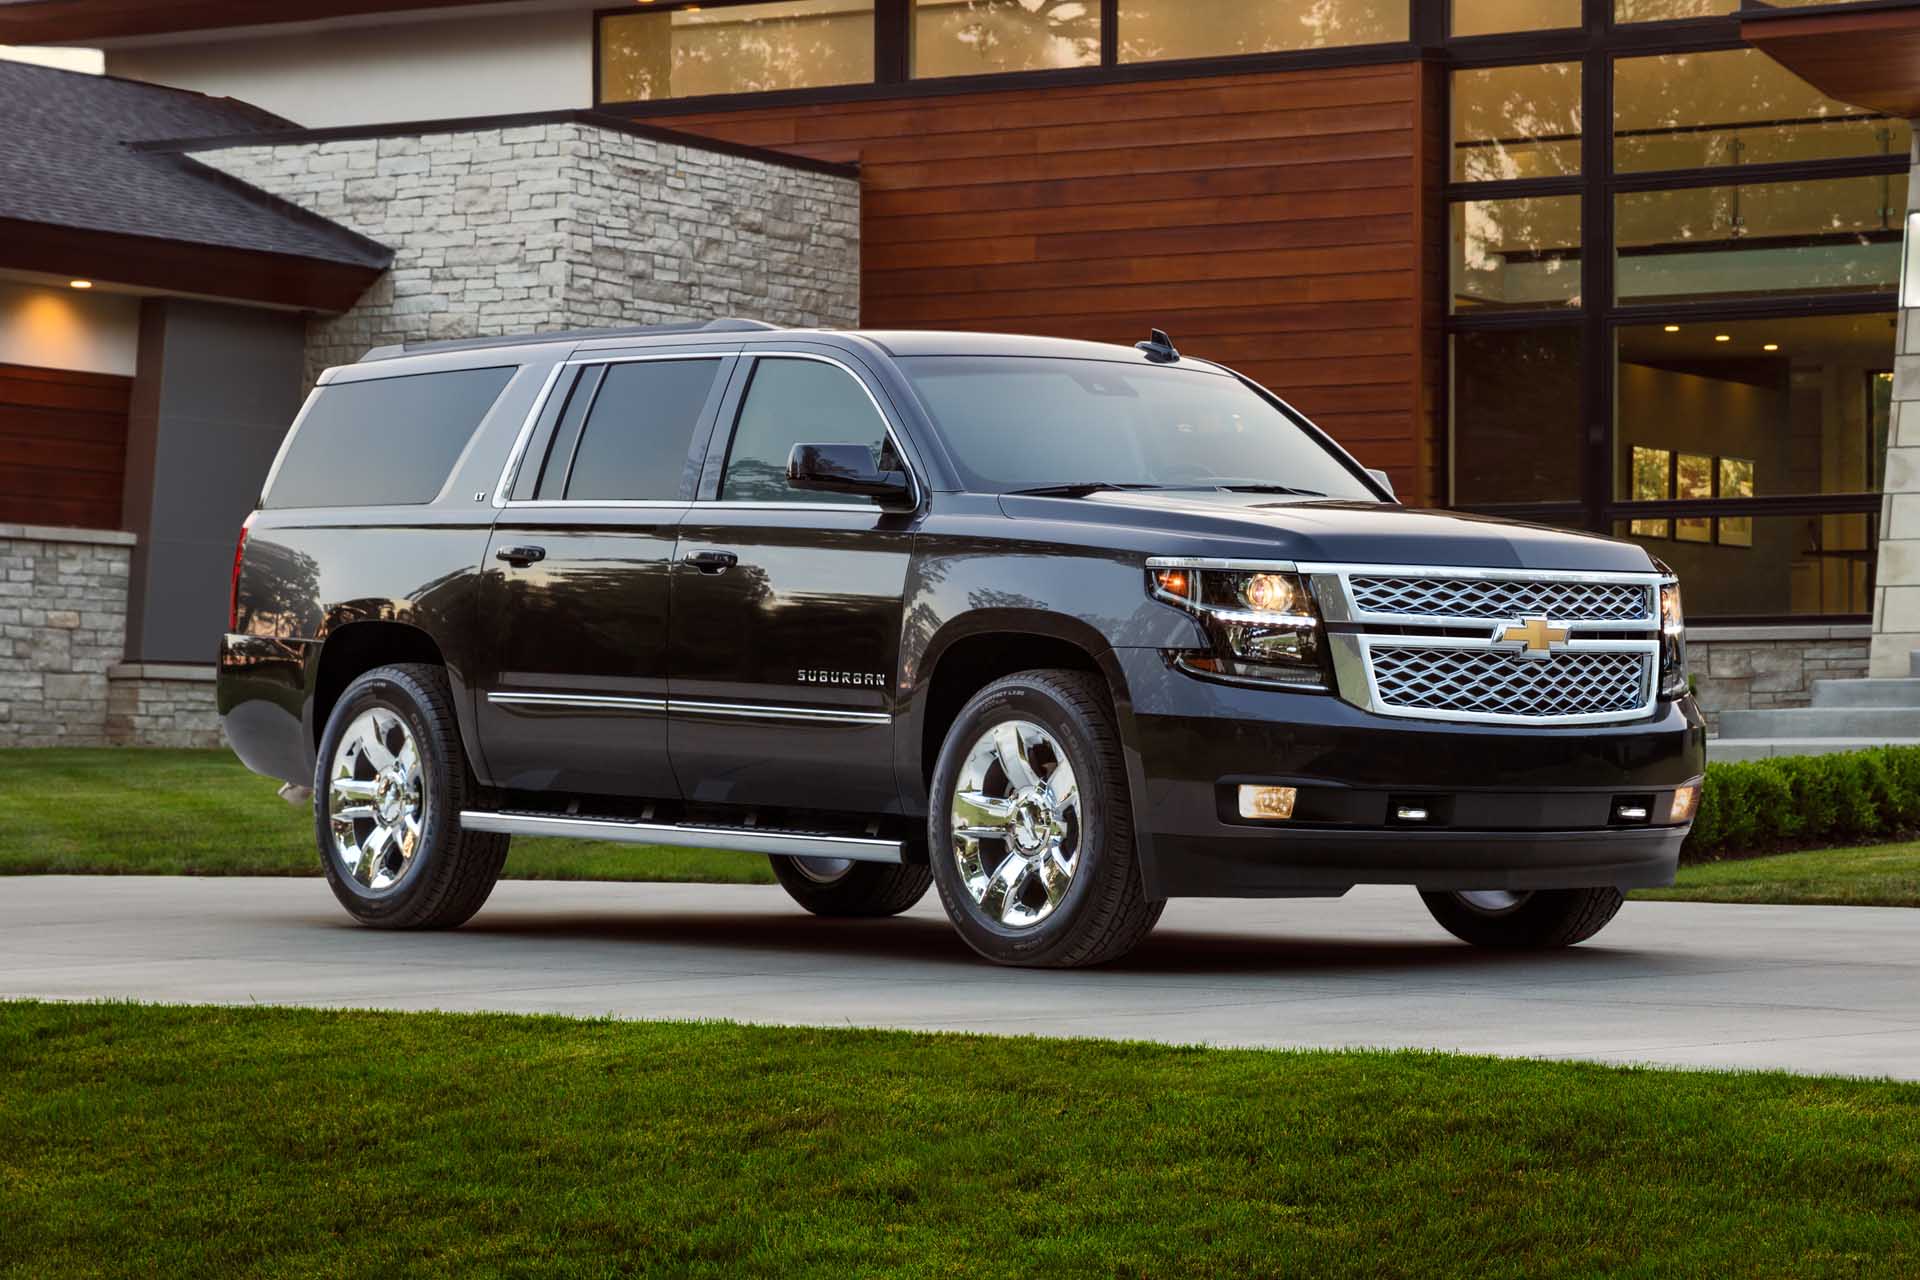 2020 Chevrolet Suburban (Chevy) Review, Ratings, Specs, Prices, and Photos  - The Car Connection